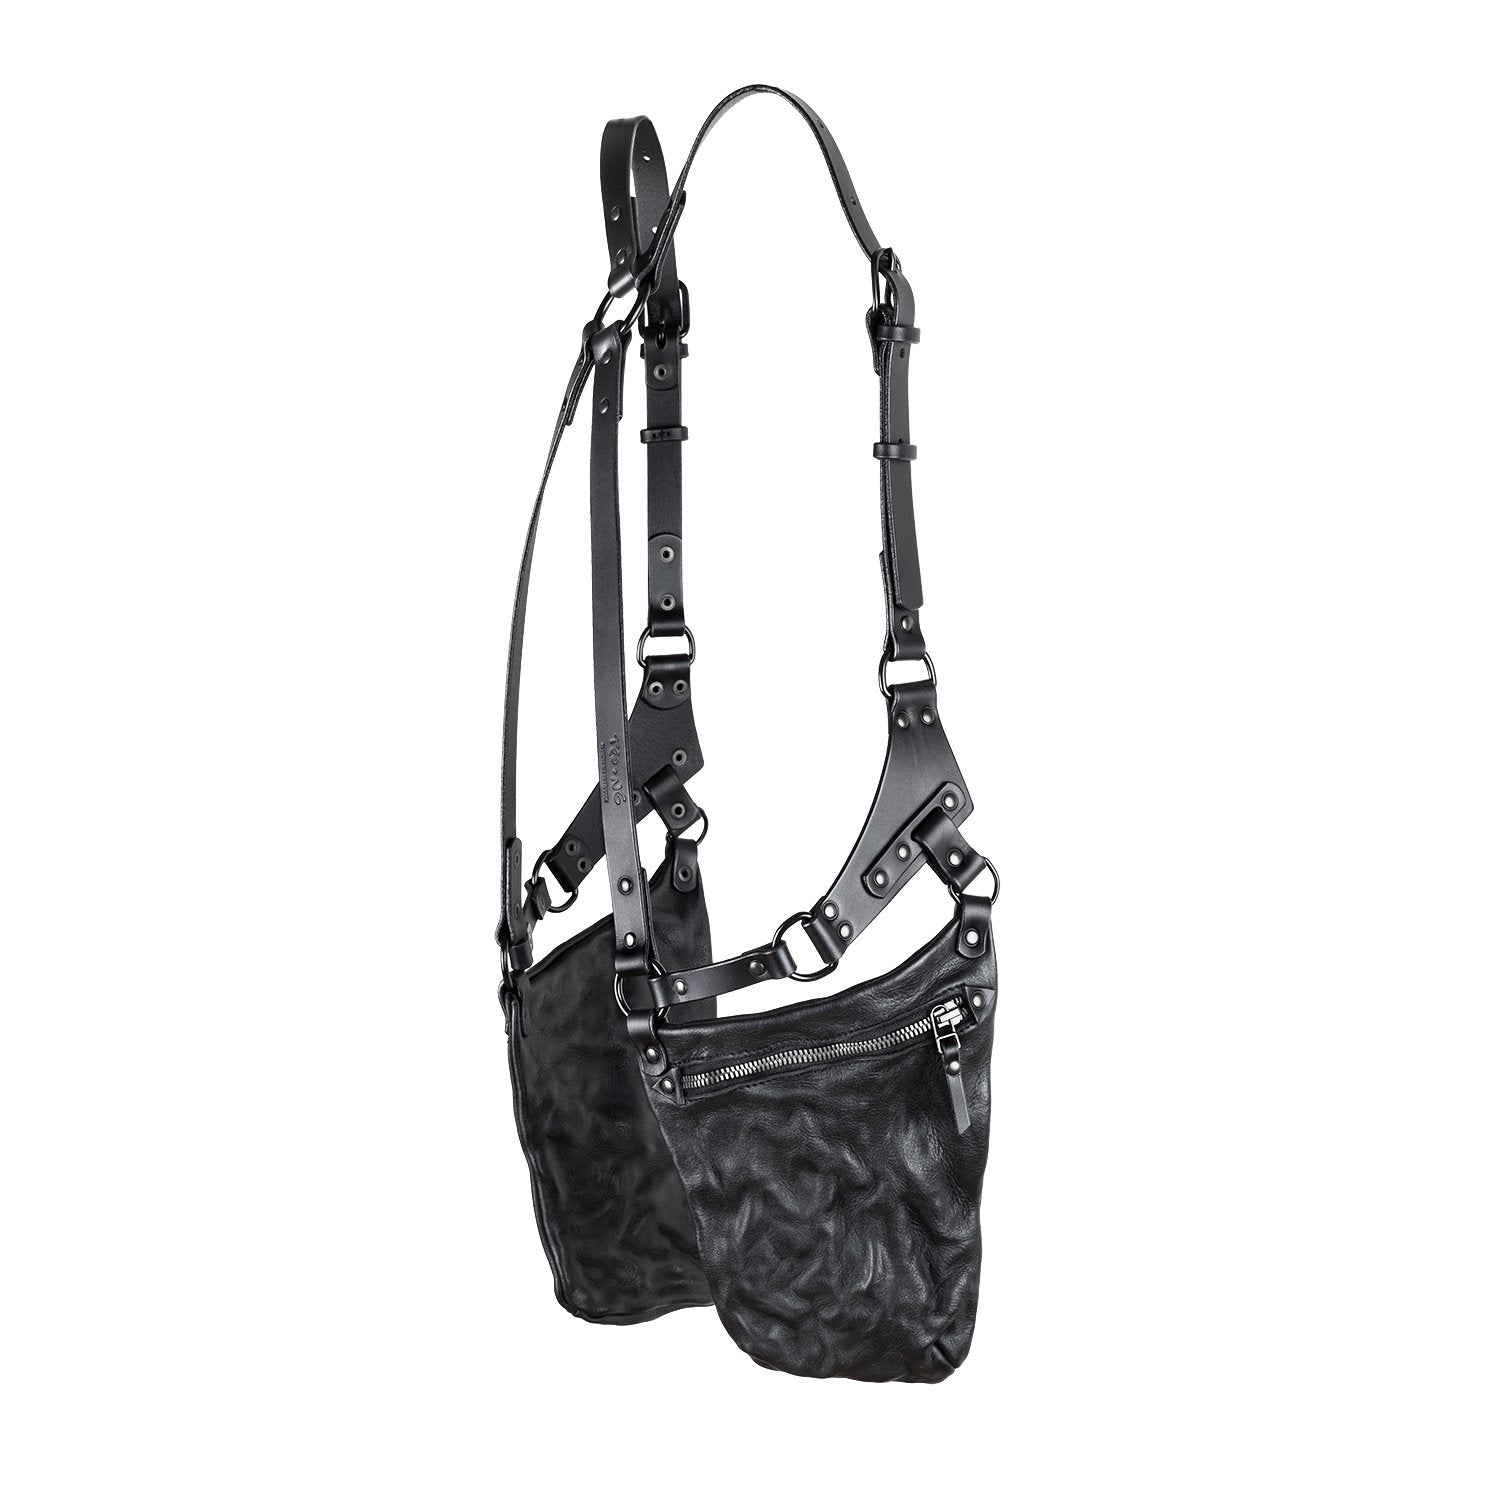 A3TEPHRA 123BLACKExperience the epitome of French craftsmanship with our Adjustable Shoulder Strap Handbag. Handmade with the utmost care and attention to detail in France, this bag Accessori UnisexLA HAINE INSIDE USTEPHRAA3TEPHRA 123BLACK